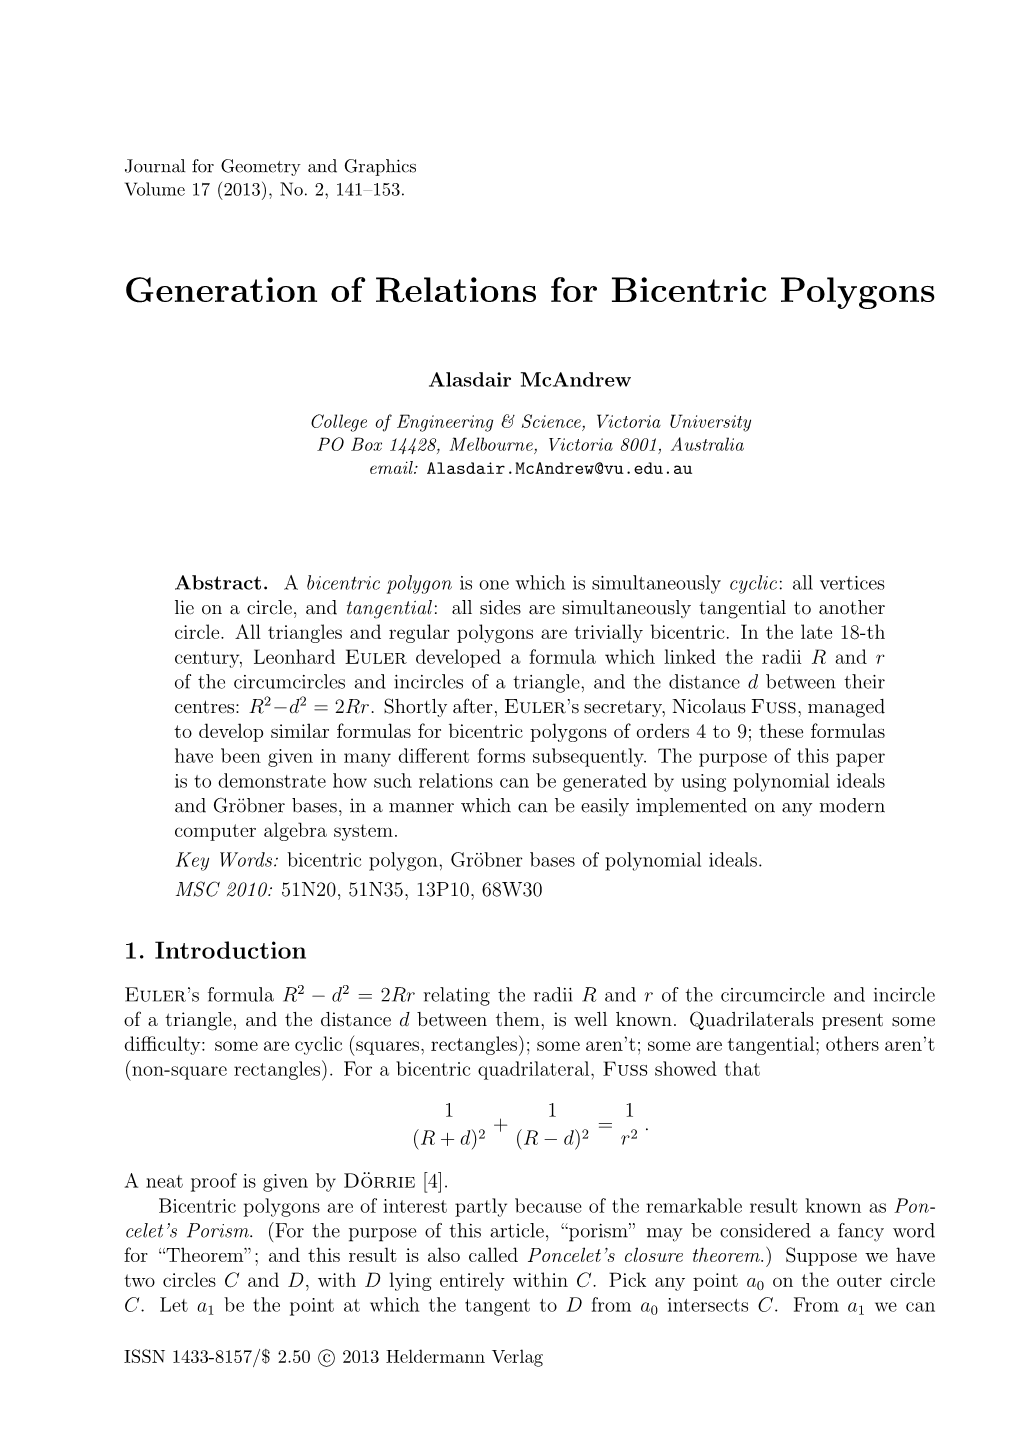 Generation of Relations for Bicentric Polygons